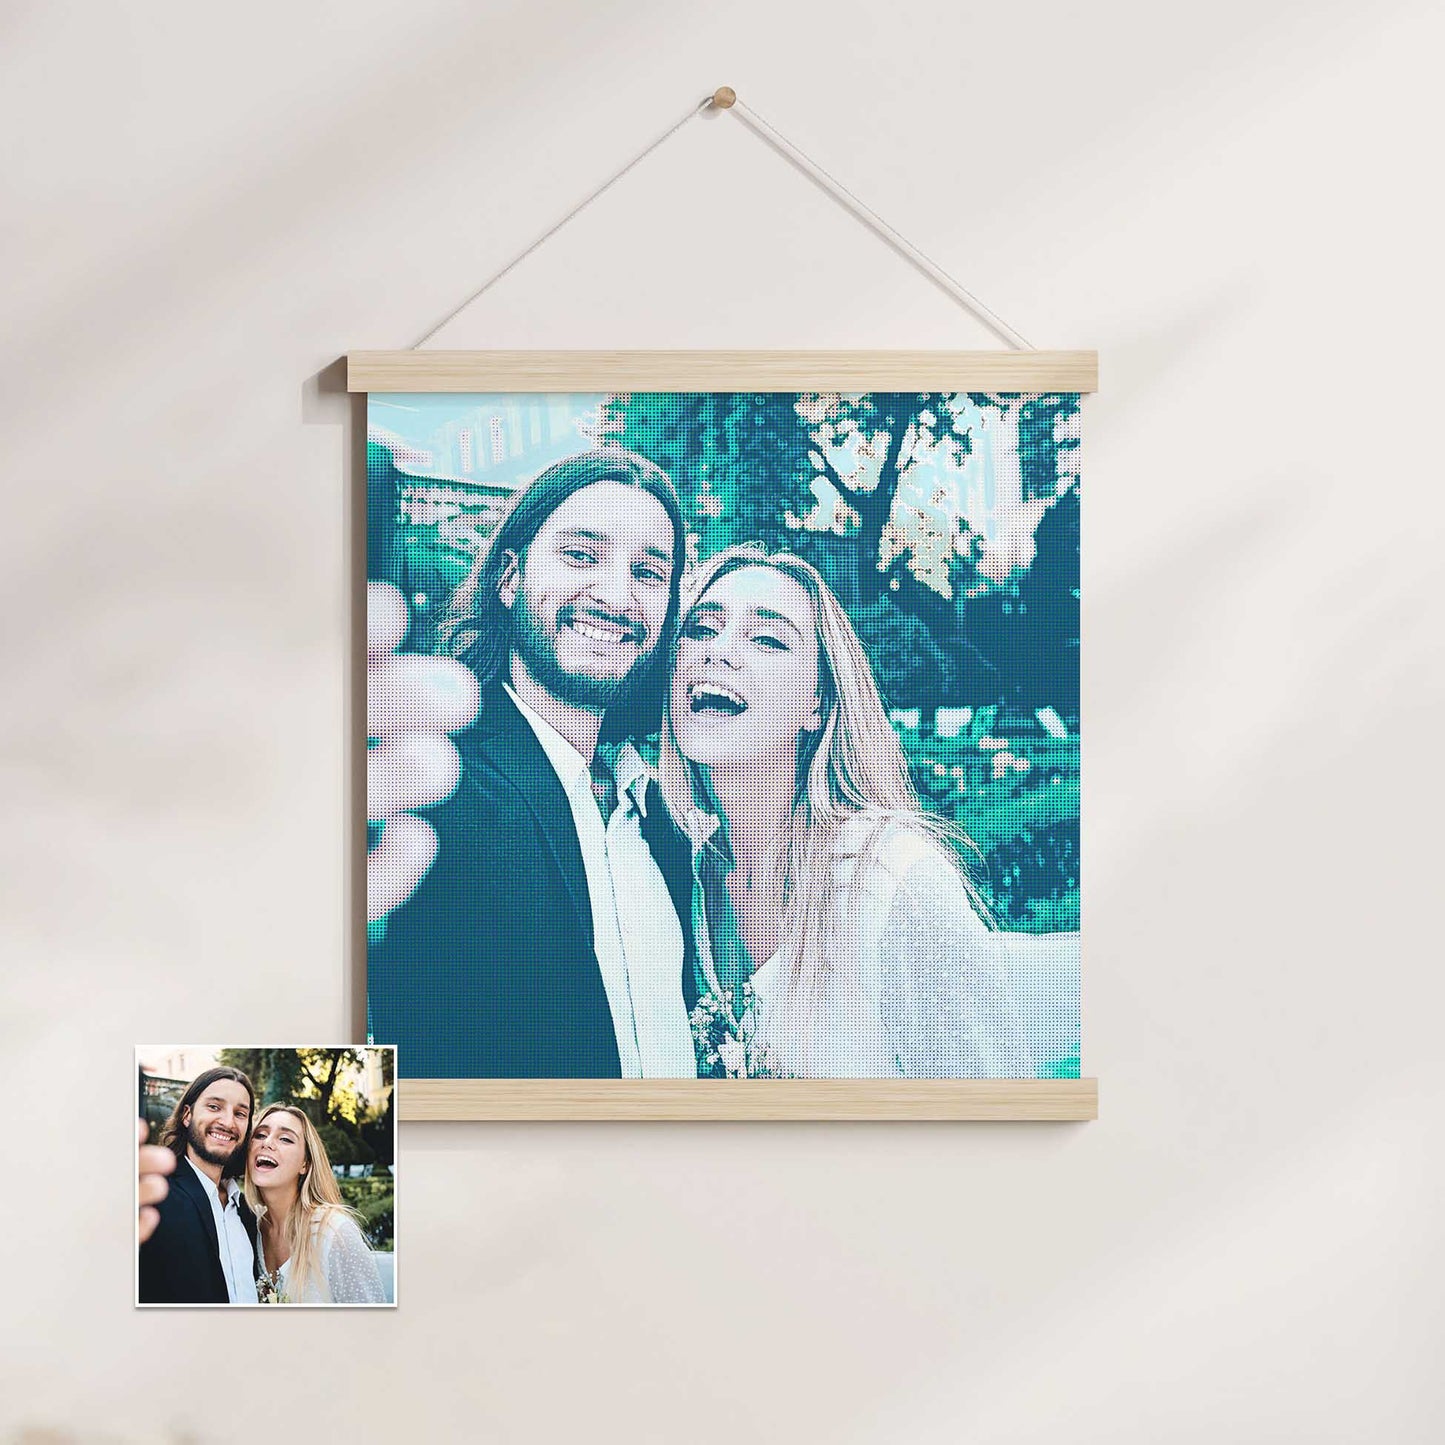 Immerse yourself in the nostalgic charm of the Personalised Teal Grunge Poster Hanger. Printed from your photo with a grunge effect and halftone filter, it showcases vibrant teal hues that create a retro and old school pop art vibe